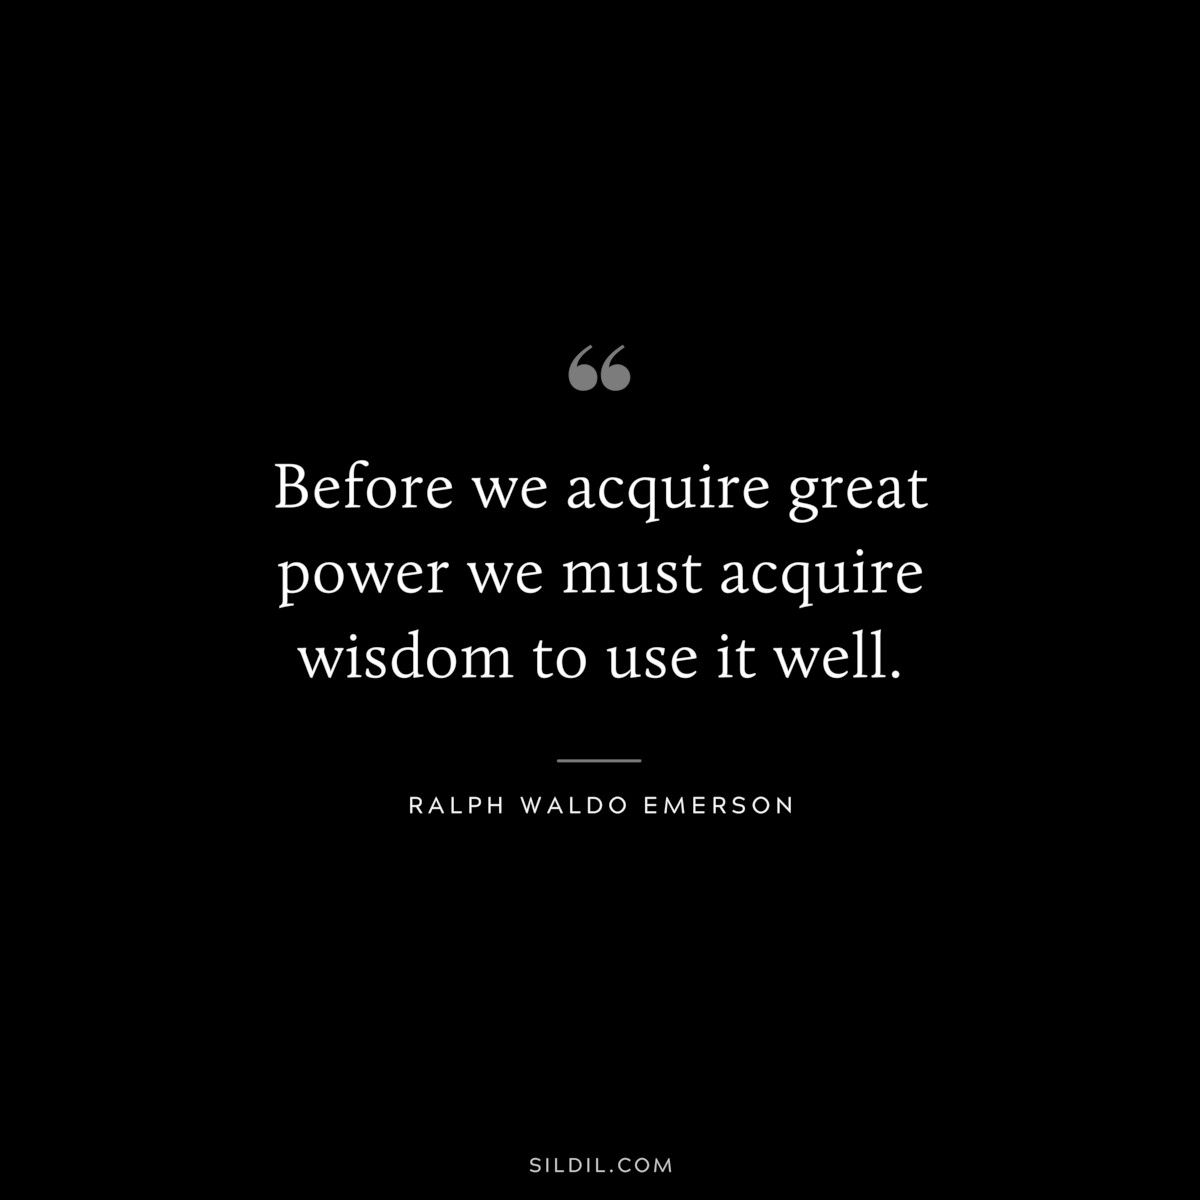 Before we acquire great power we must acquire wisdom to use it well. — Ralph Waldo Emerson